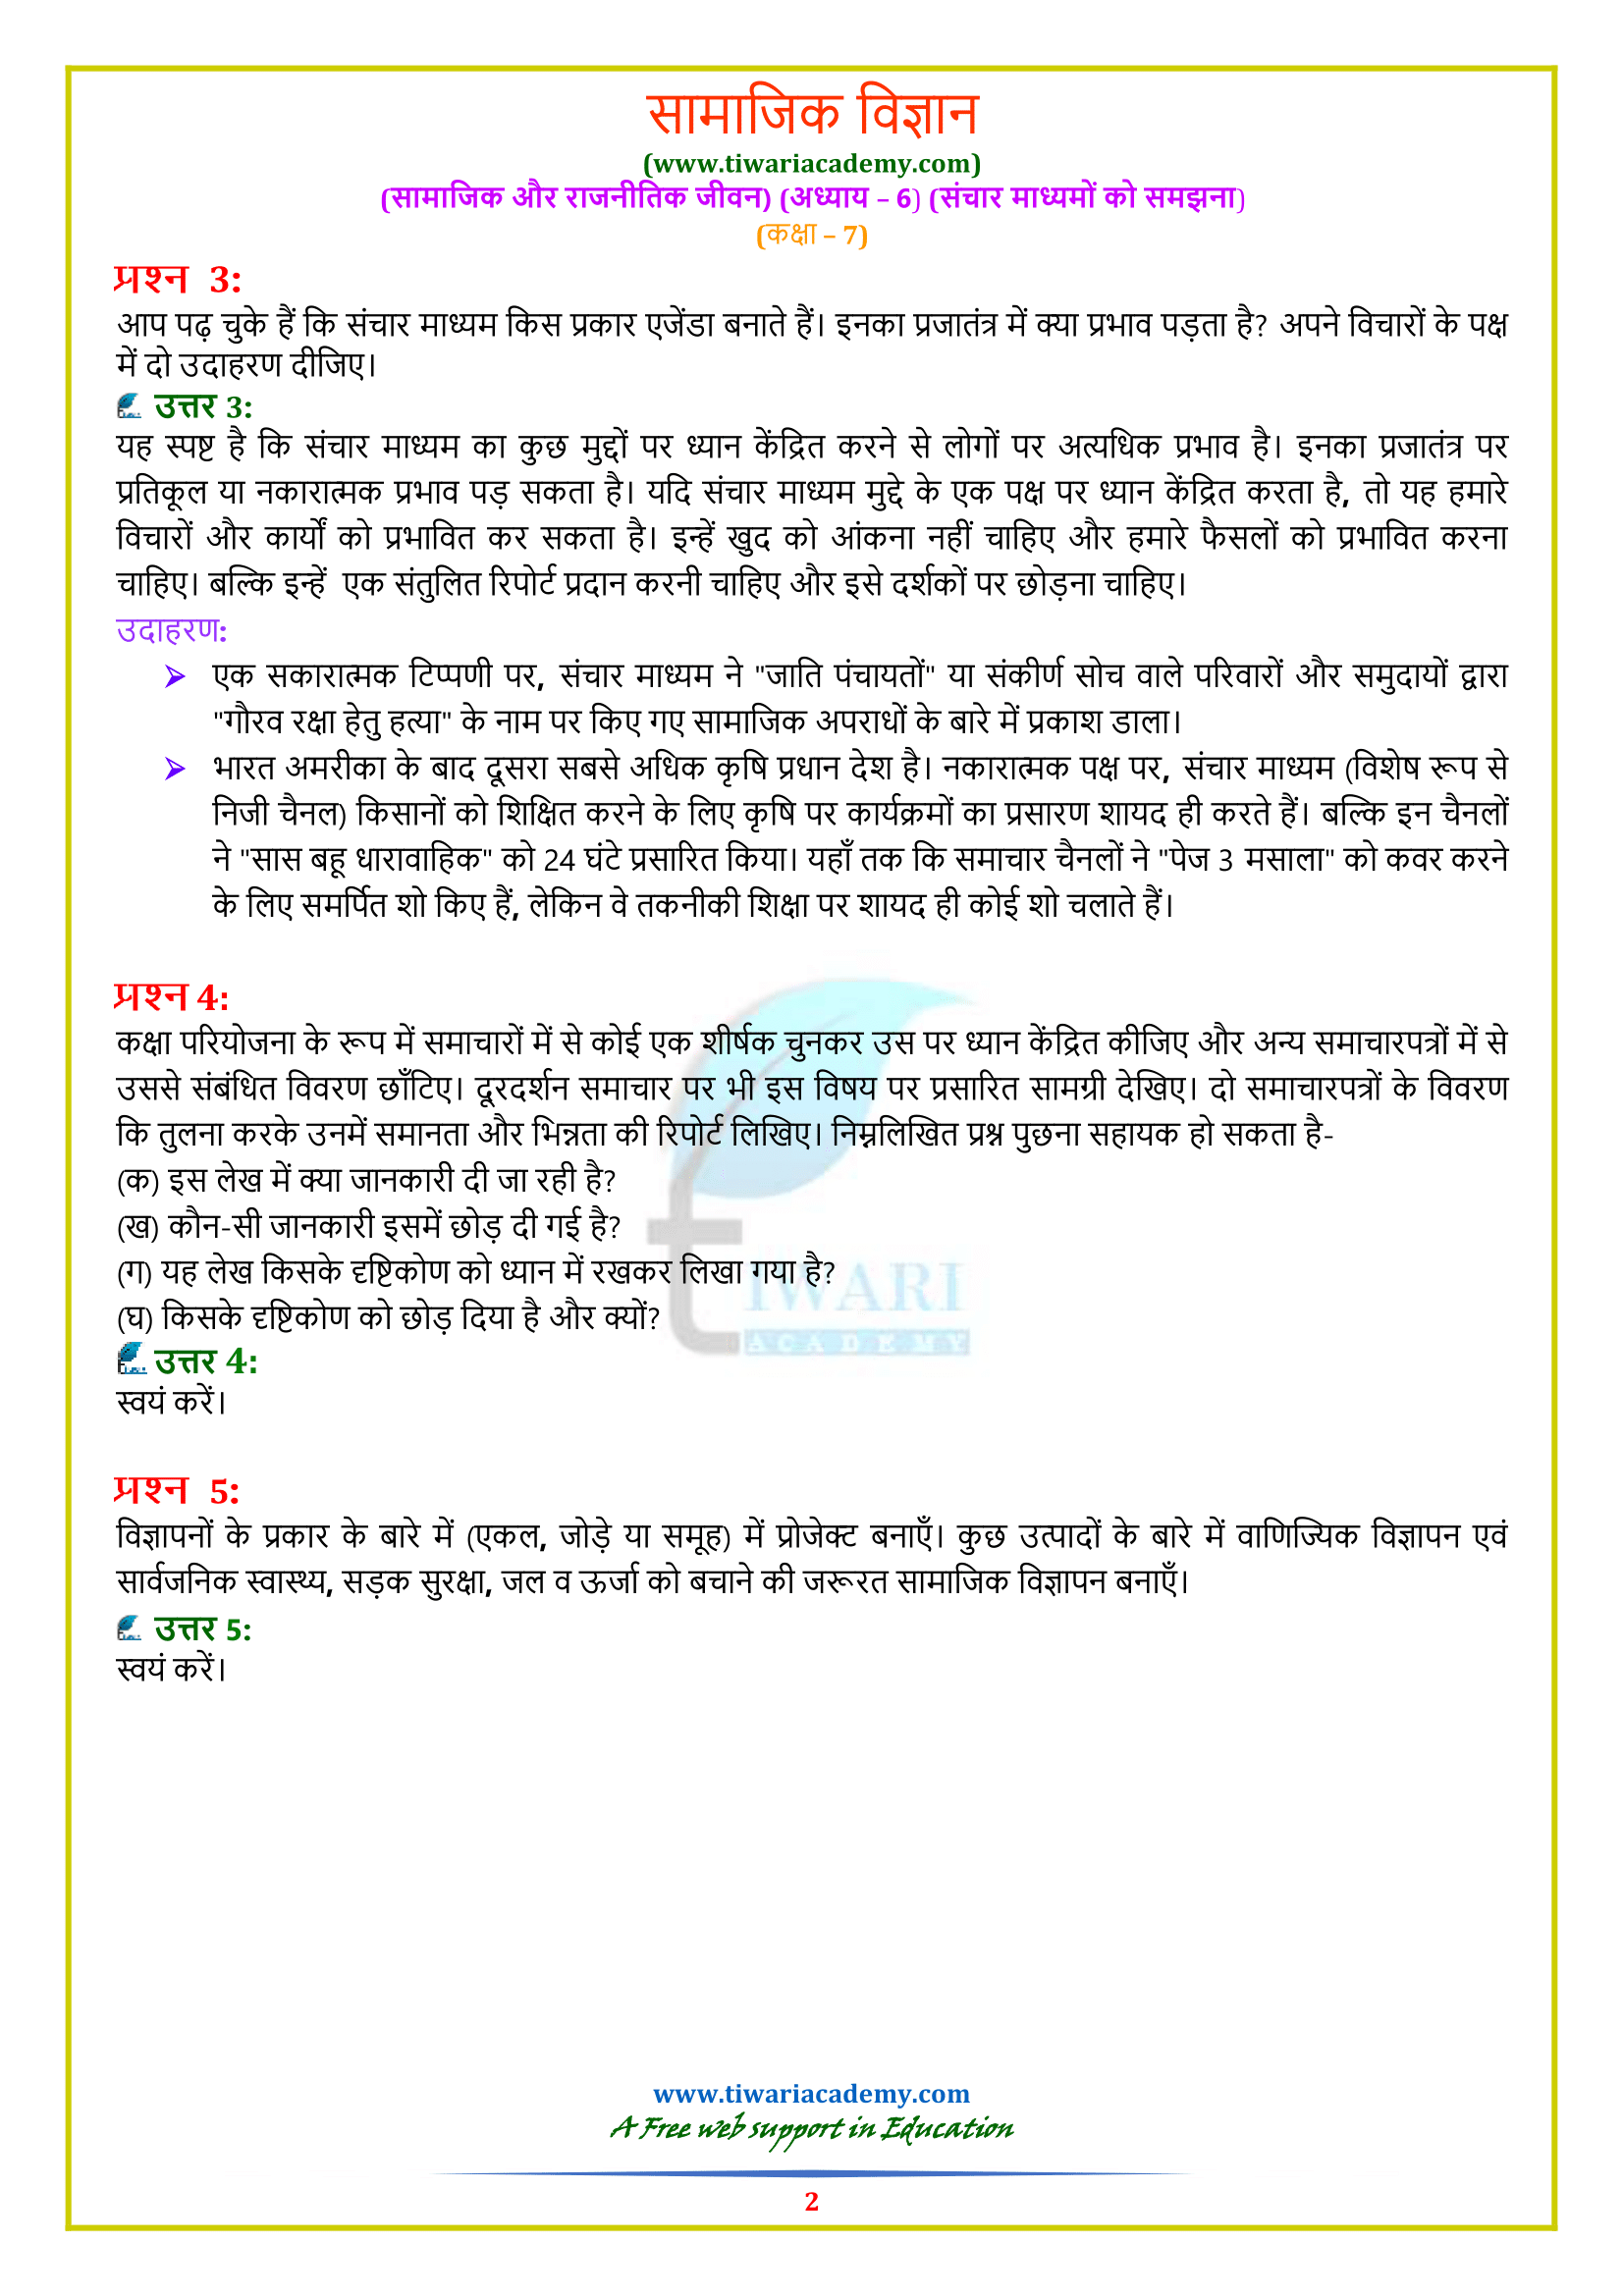 NCERT Solutions for Class 7 Civics Chapter 6 Answers in Hindi